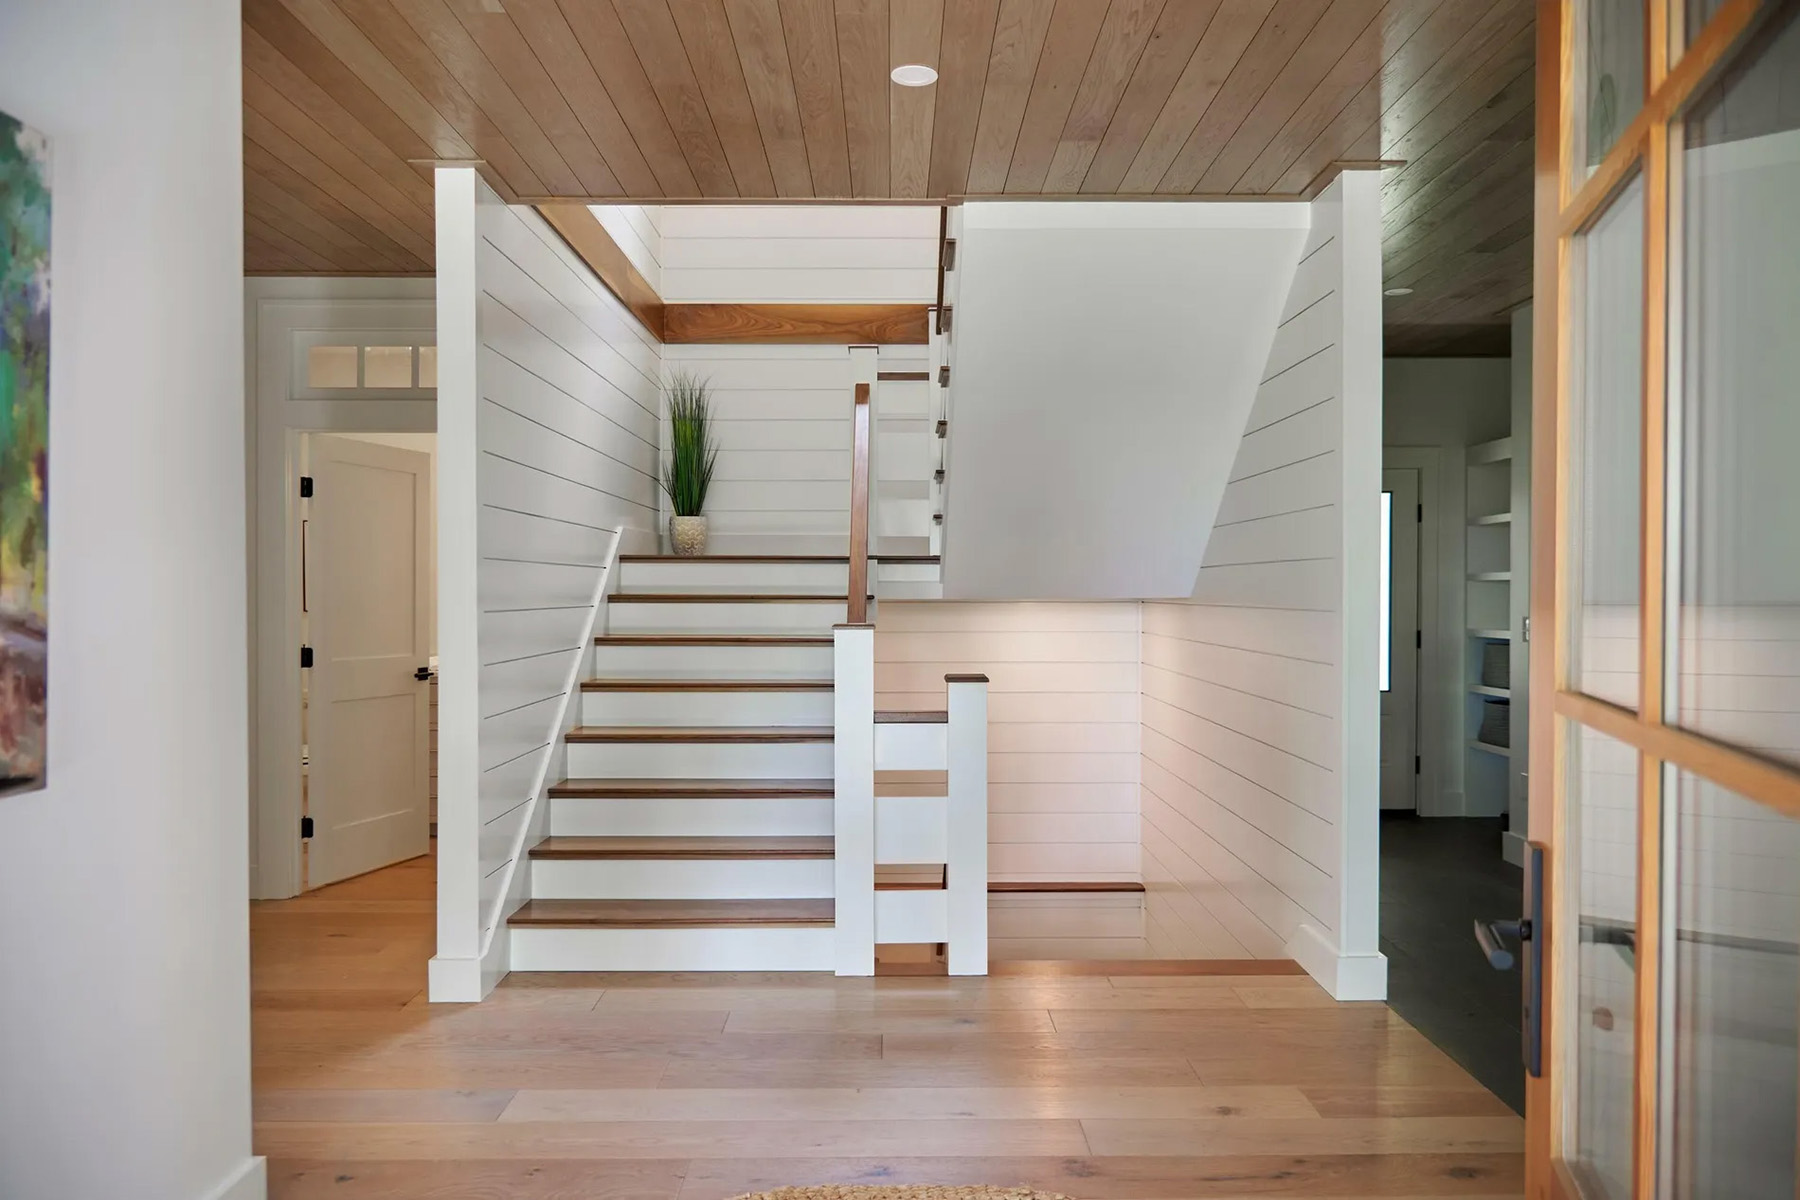 Tongue and Groove wood ceiling stained natural with recessed lighting and white shiplap walls. Matching wood floors and stairs.